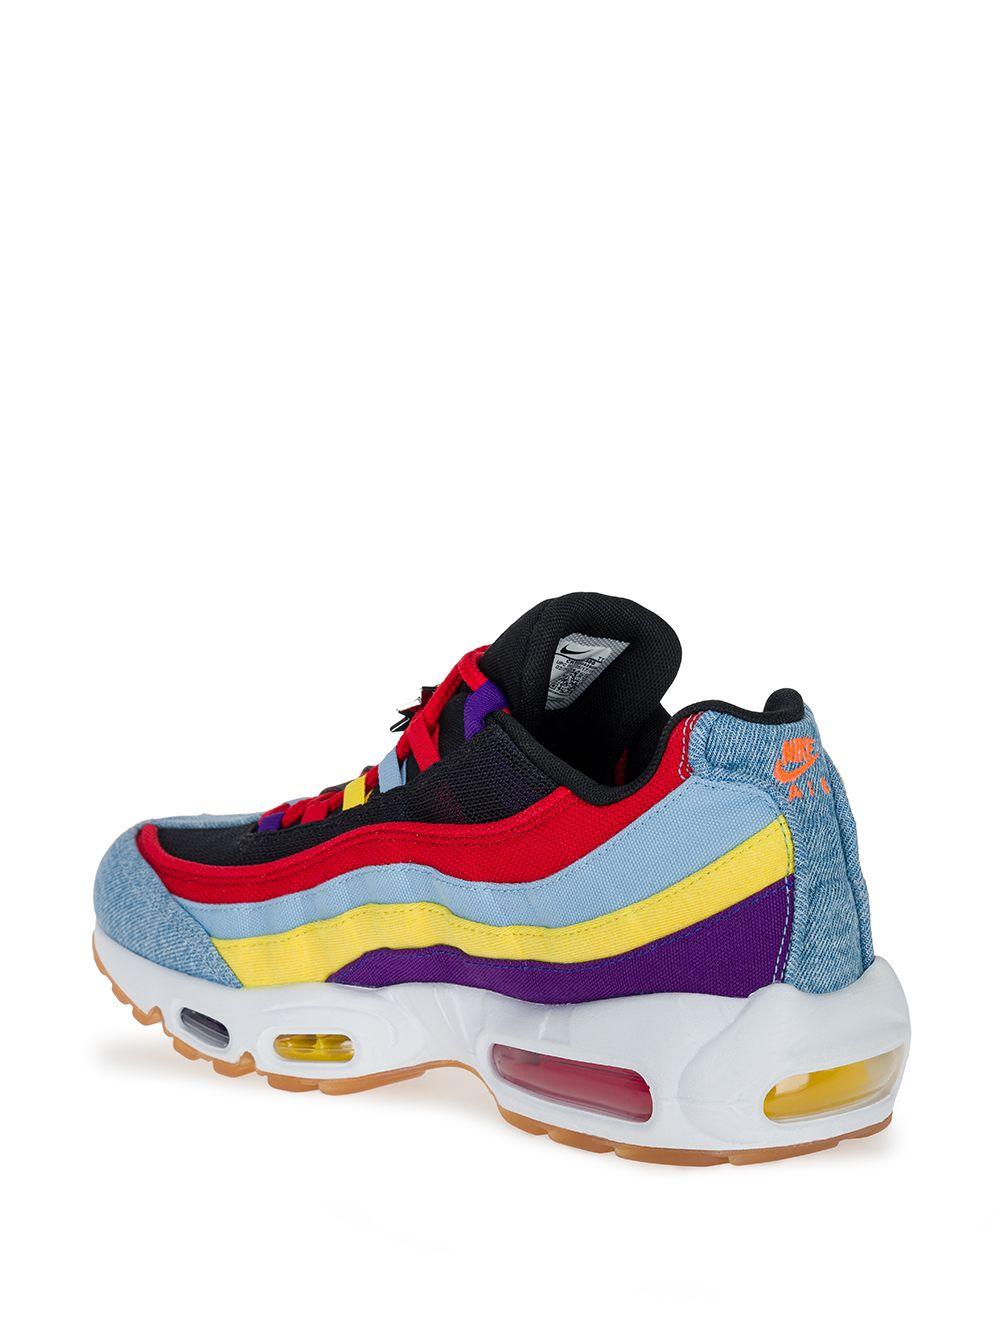 Nike Air Max 95 Sp Shoe in Blue - Lyst